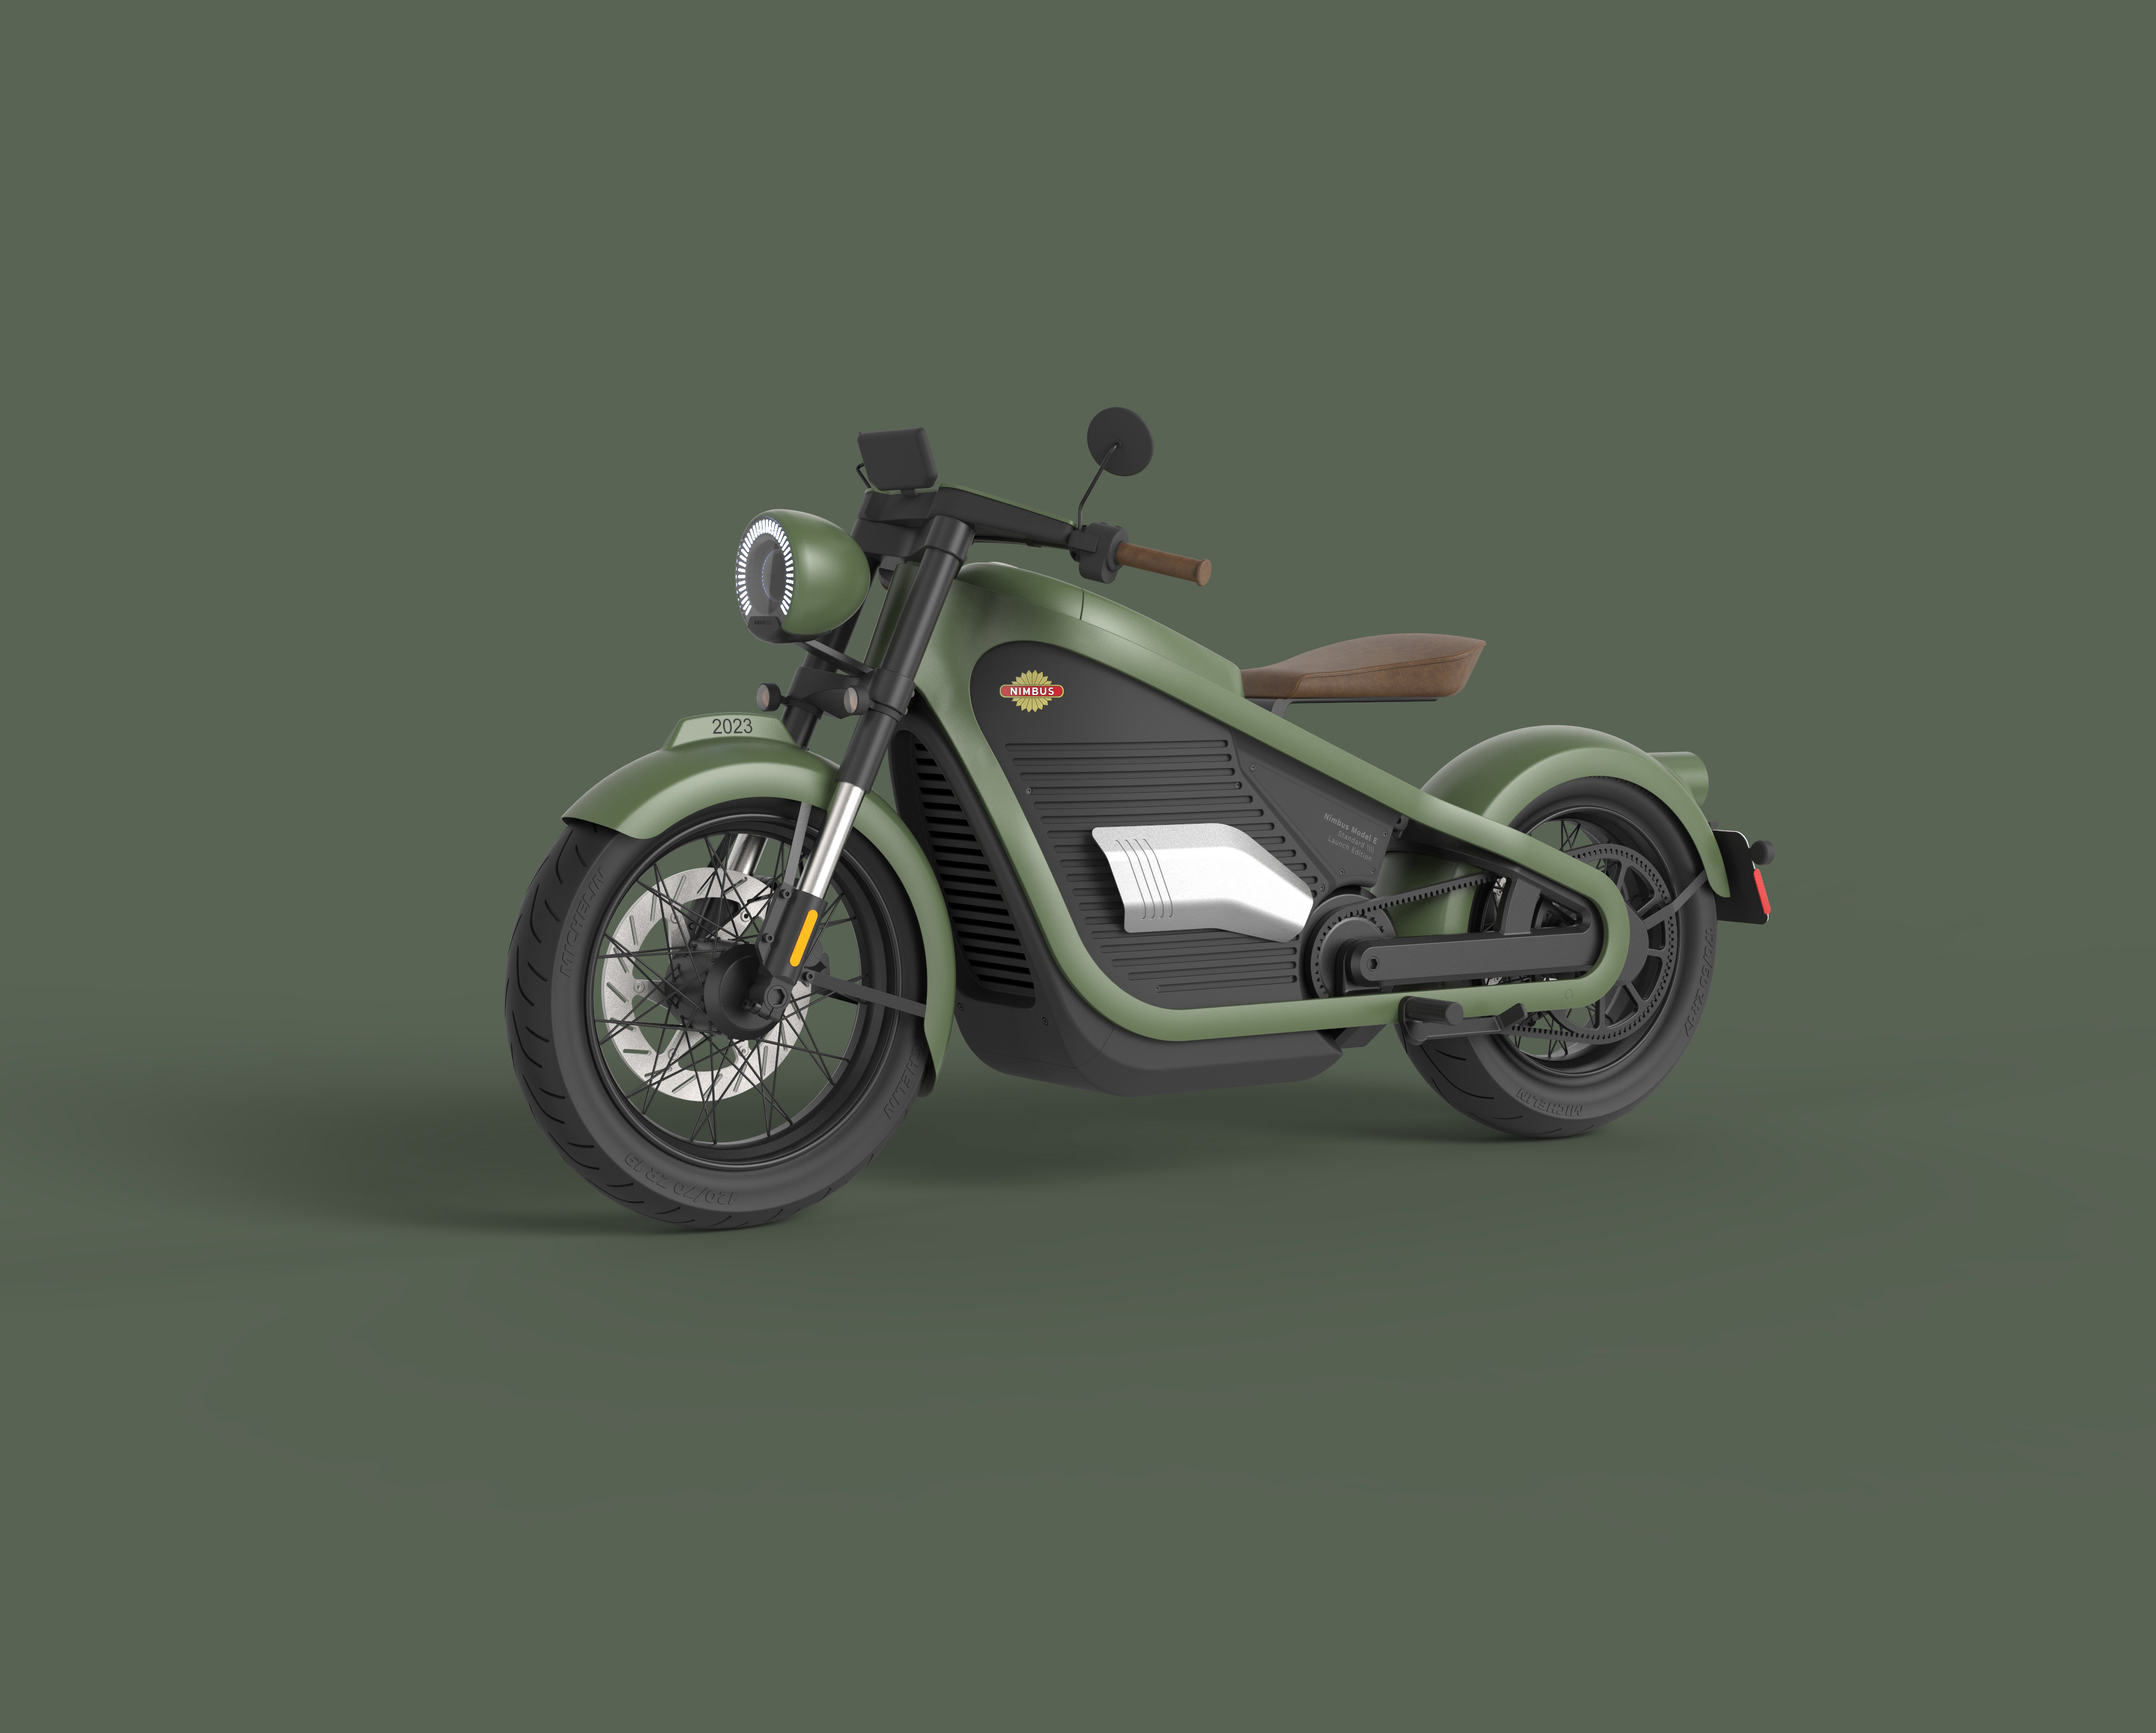 04_Nimbus-Motorcycles-Denmark---Electric-motorcycle---Side-view_smalljpg